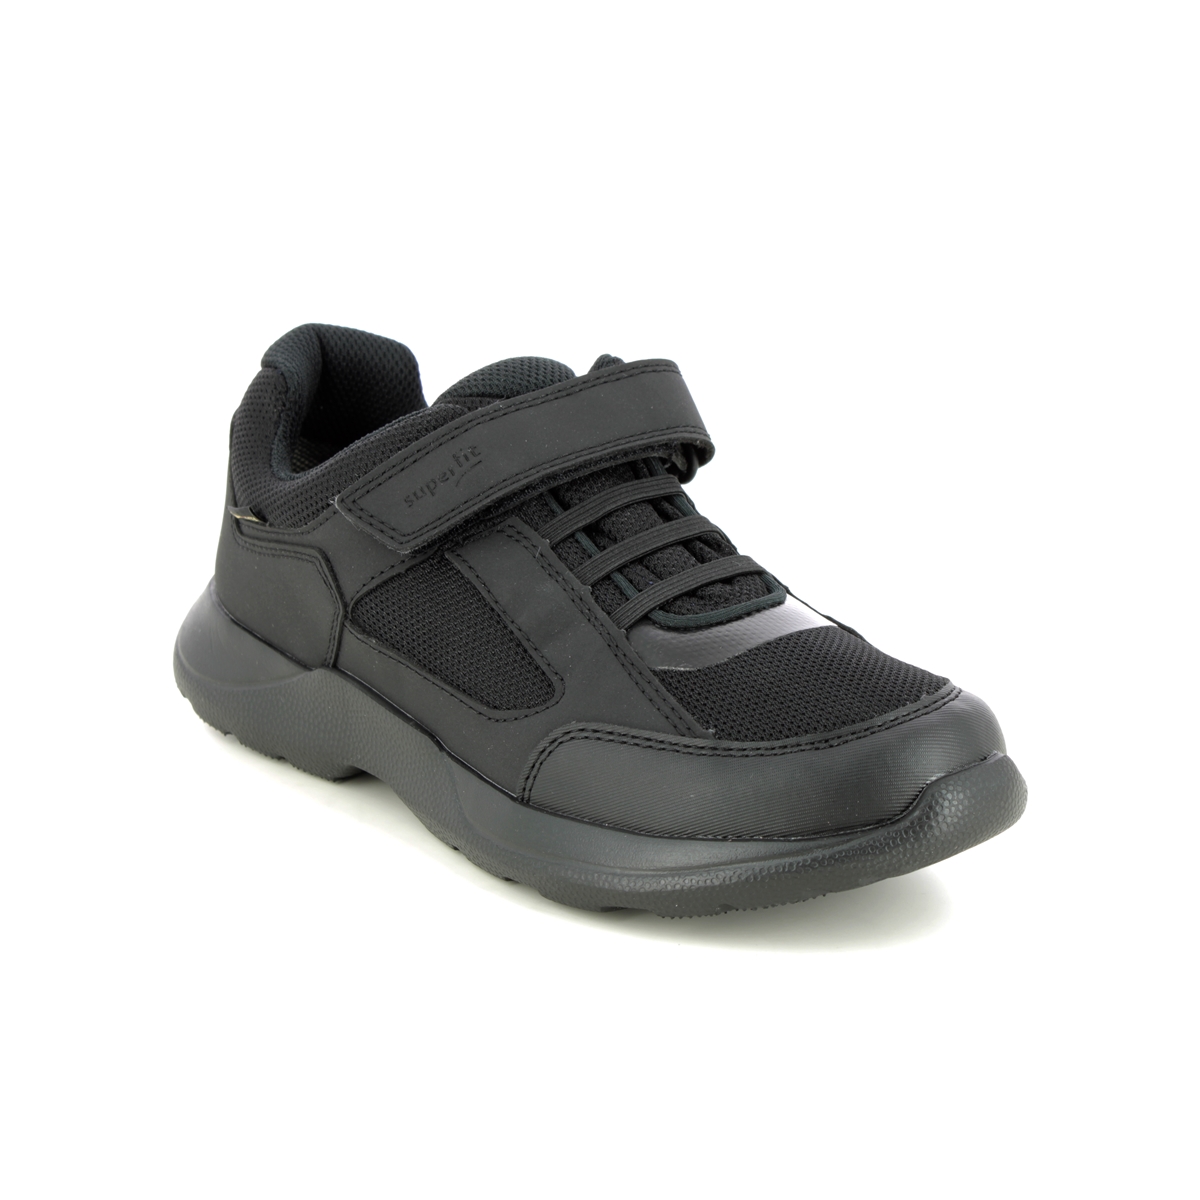 Superfit Rush Gtx Bungee Black Kids Trainers 1006223-0000 In Size 39 In Plain Black For kids